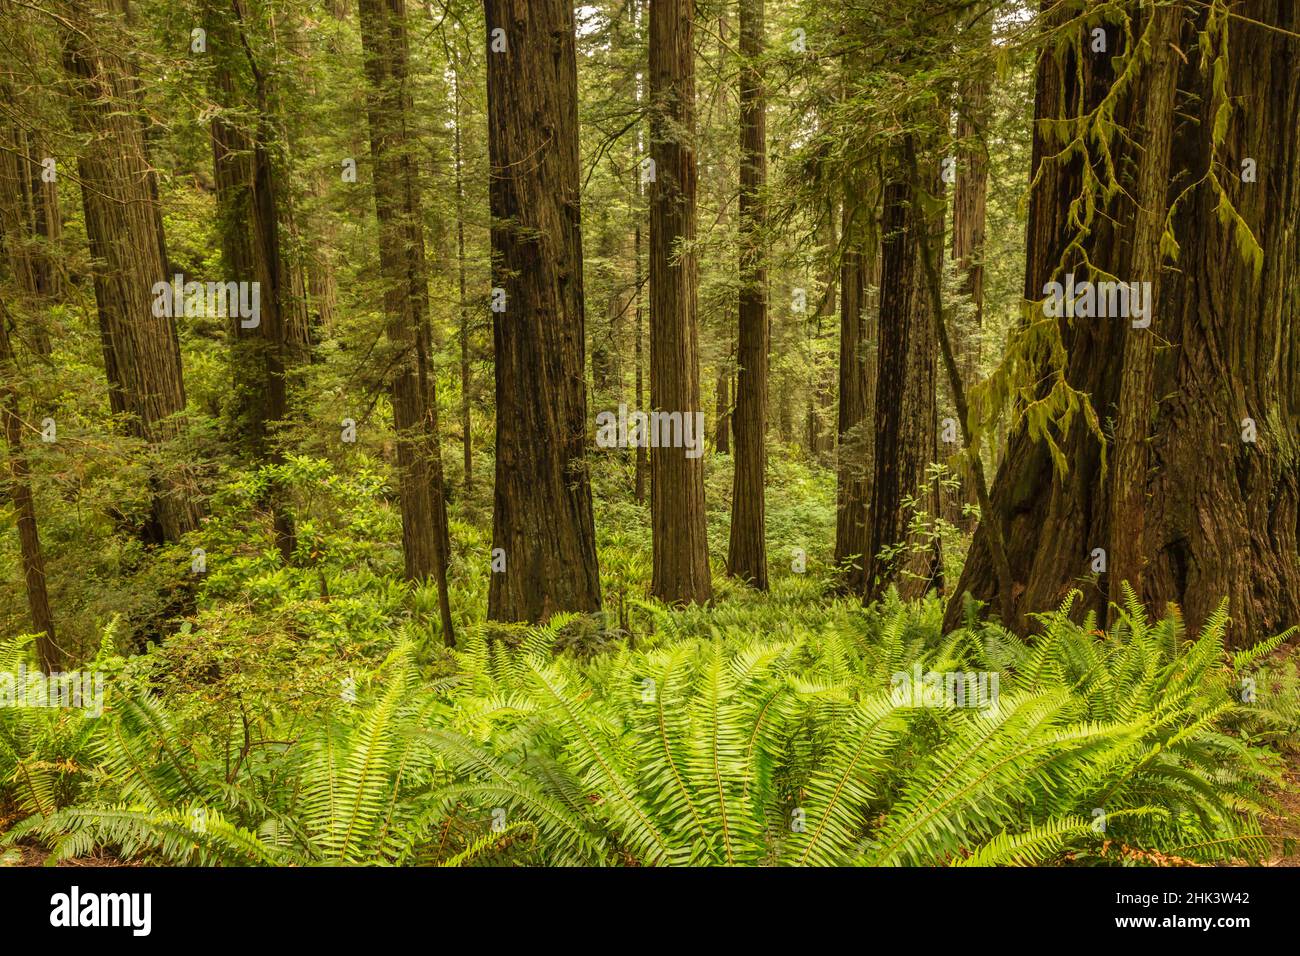 USA, California, Redwoods National and State Parks. Ferns and redwood forest. Credit as: Cathy & Gordon Illg / Jaynes Gallery / DanitaDelimont.com Stock Photo